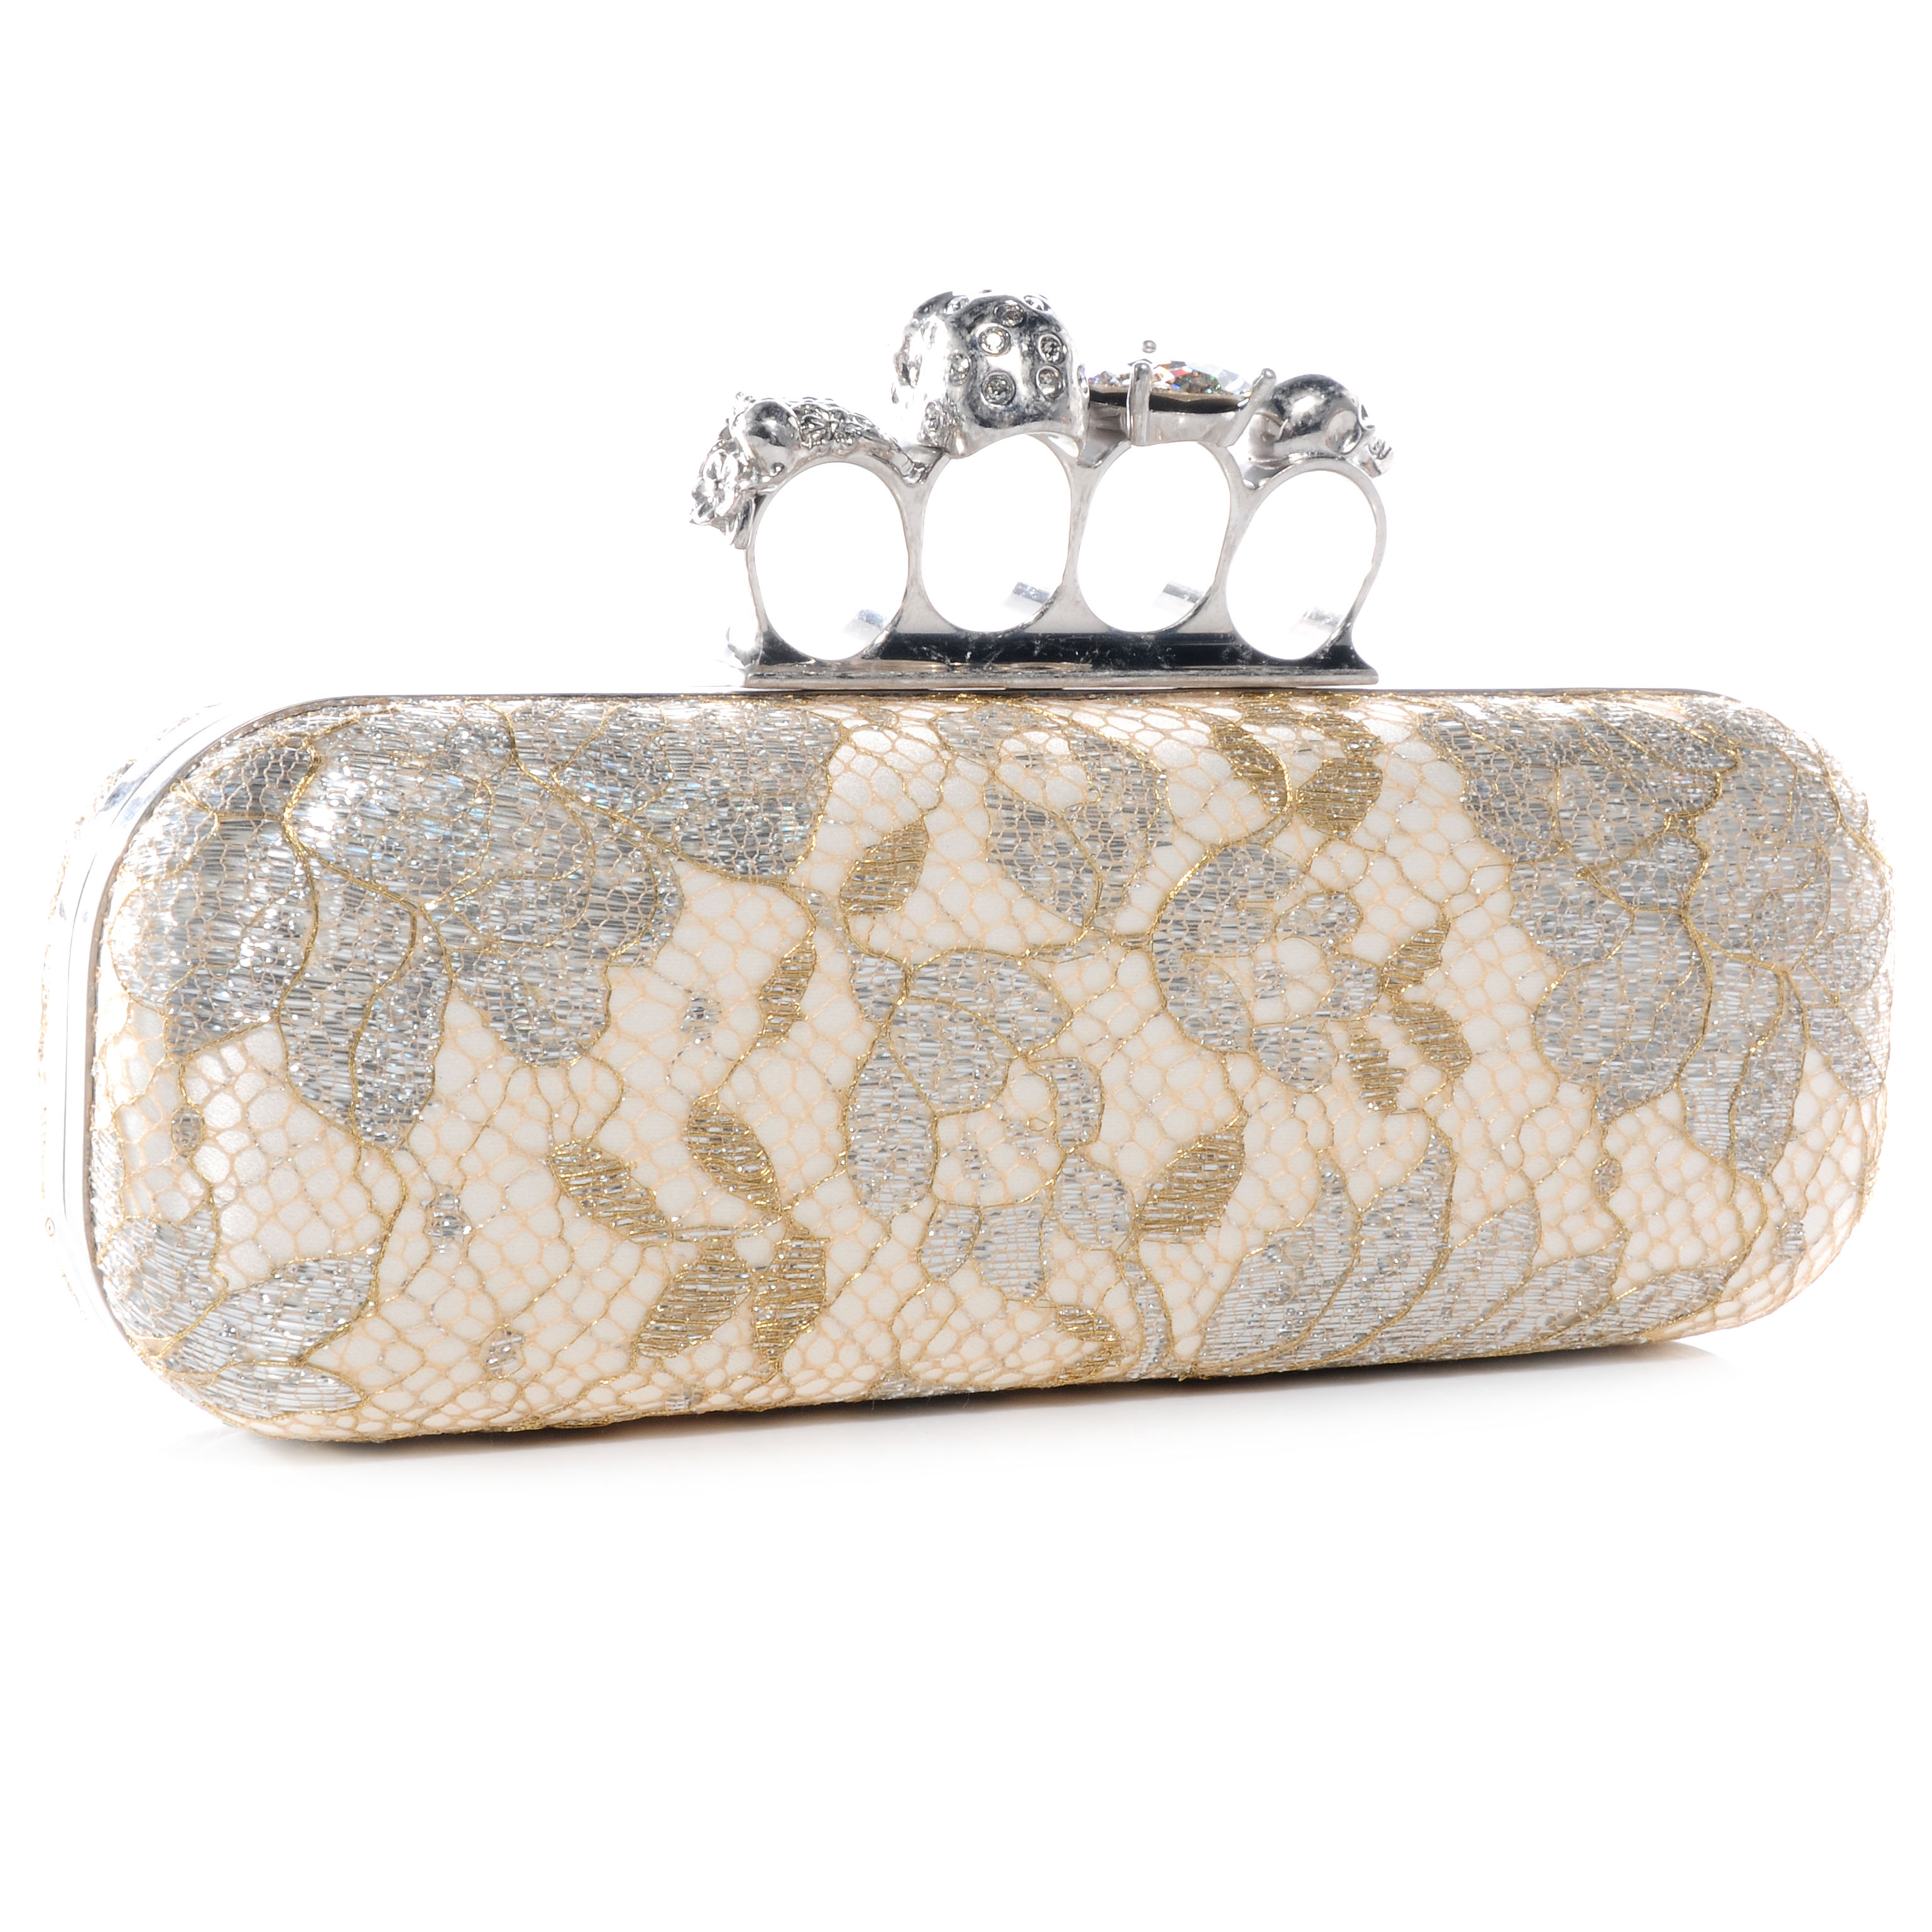 ALEXANDER MCQUEEN Lake Tulip Lace Knuckle-Duster Clutch Bag Silver 63544